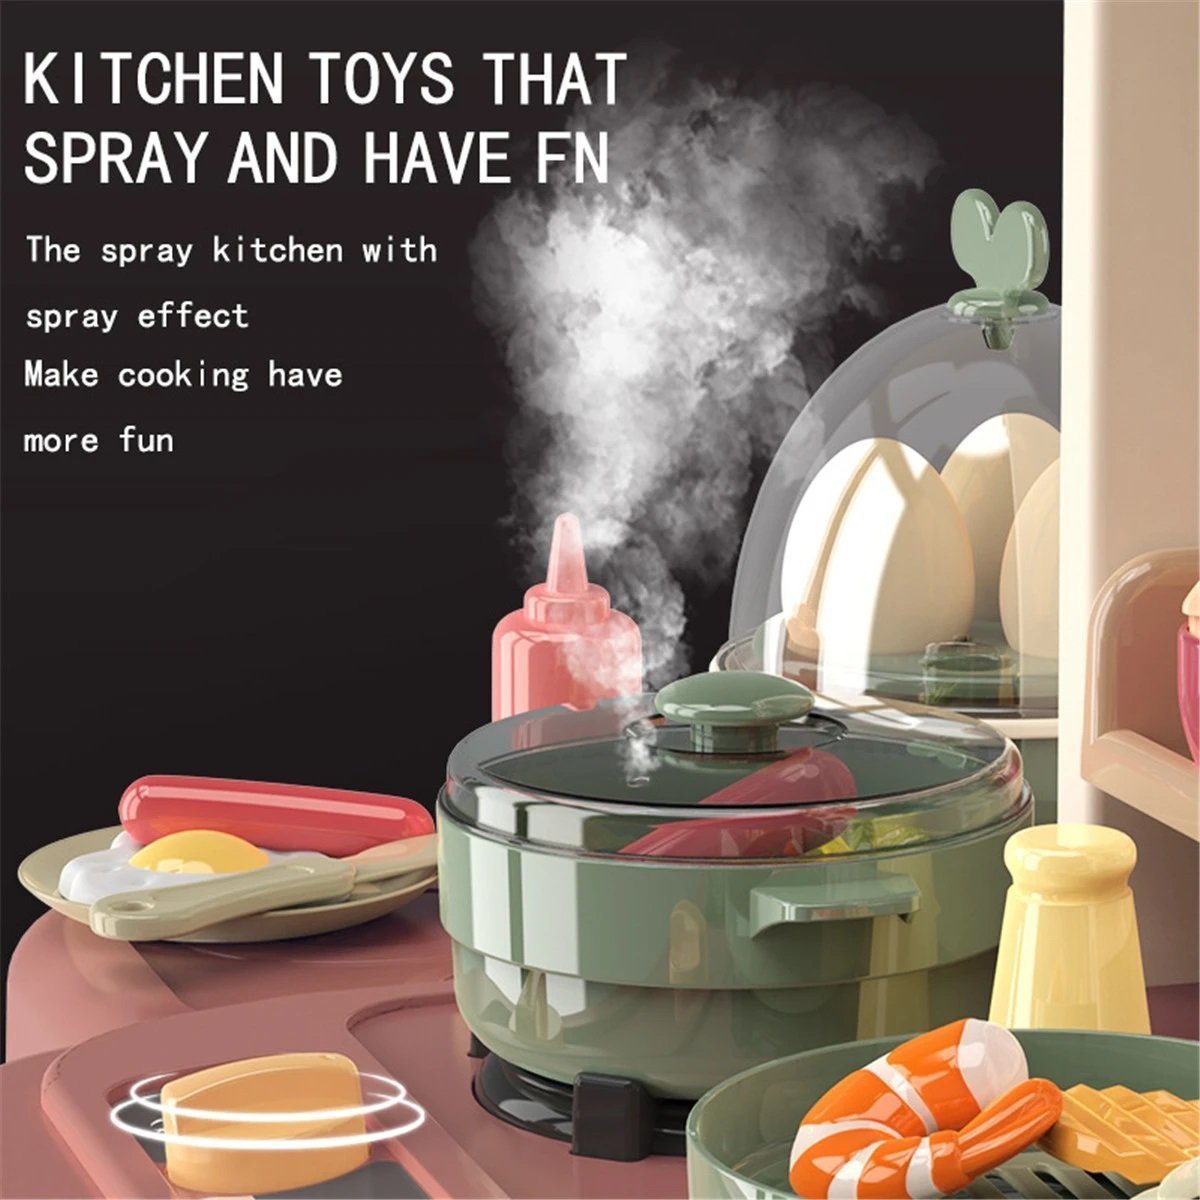 65pcs 93cm Children Kitchen Kitchenware Play Toy Simulation Steam Spray Cooking Set Cookware Tableware Gift Pink Color